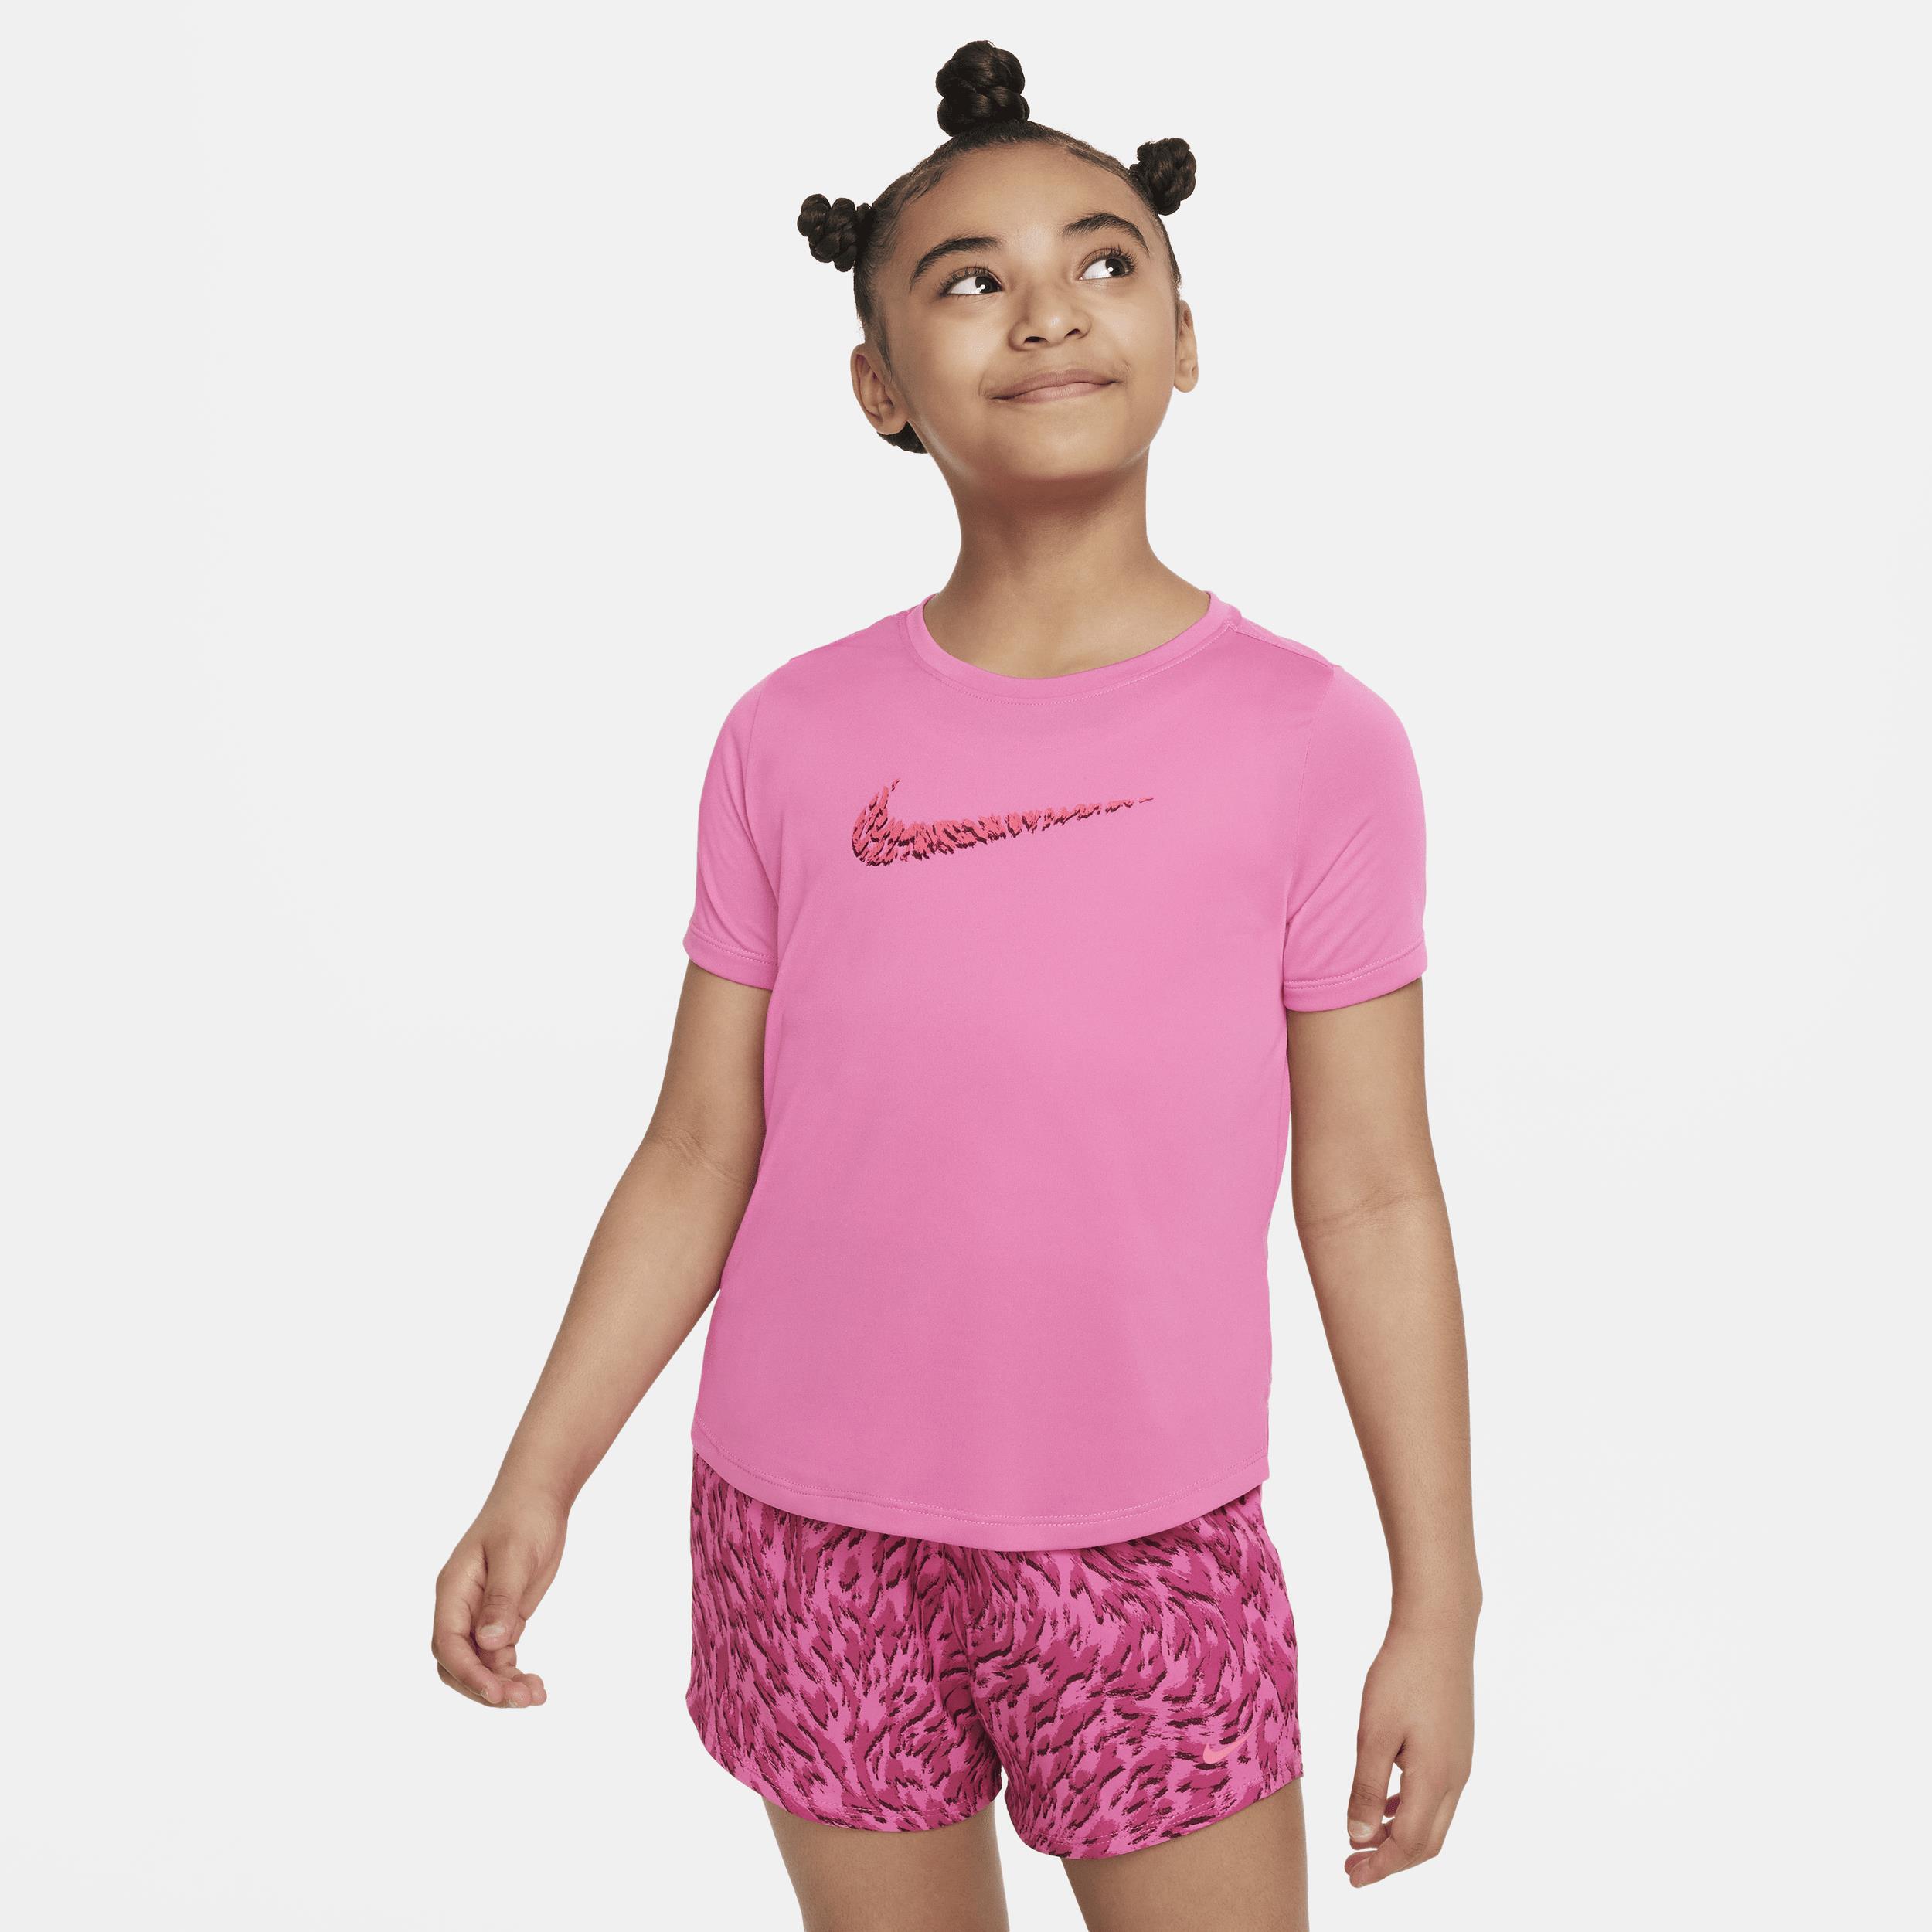 Nike One Older Kids' (Girls') Short-Sleeve Training Top - Pink - 50% Recycled Polyester